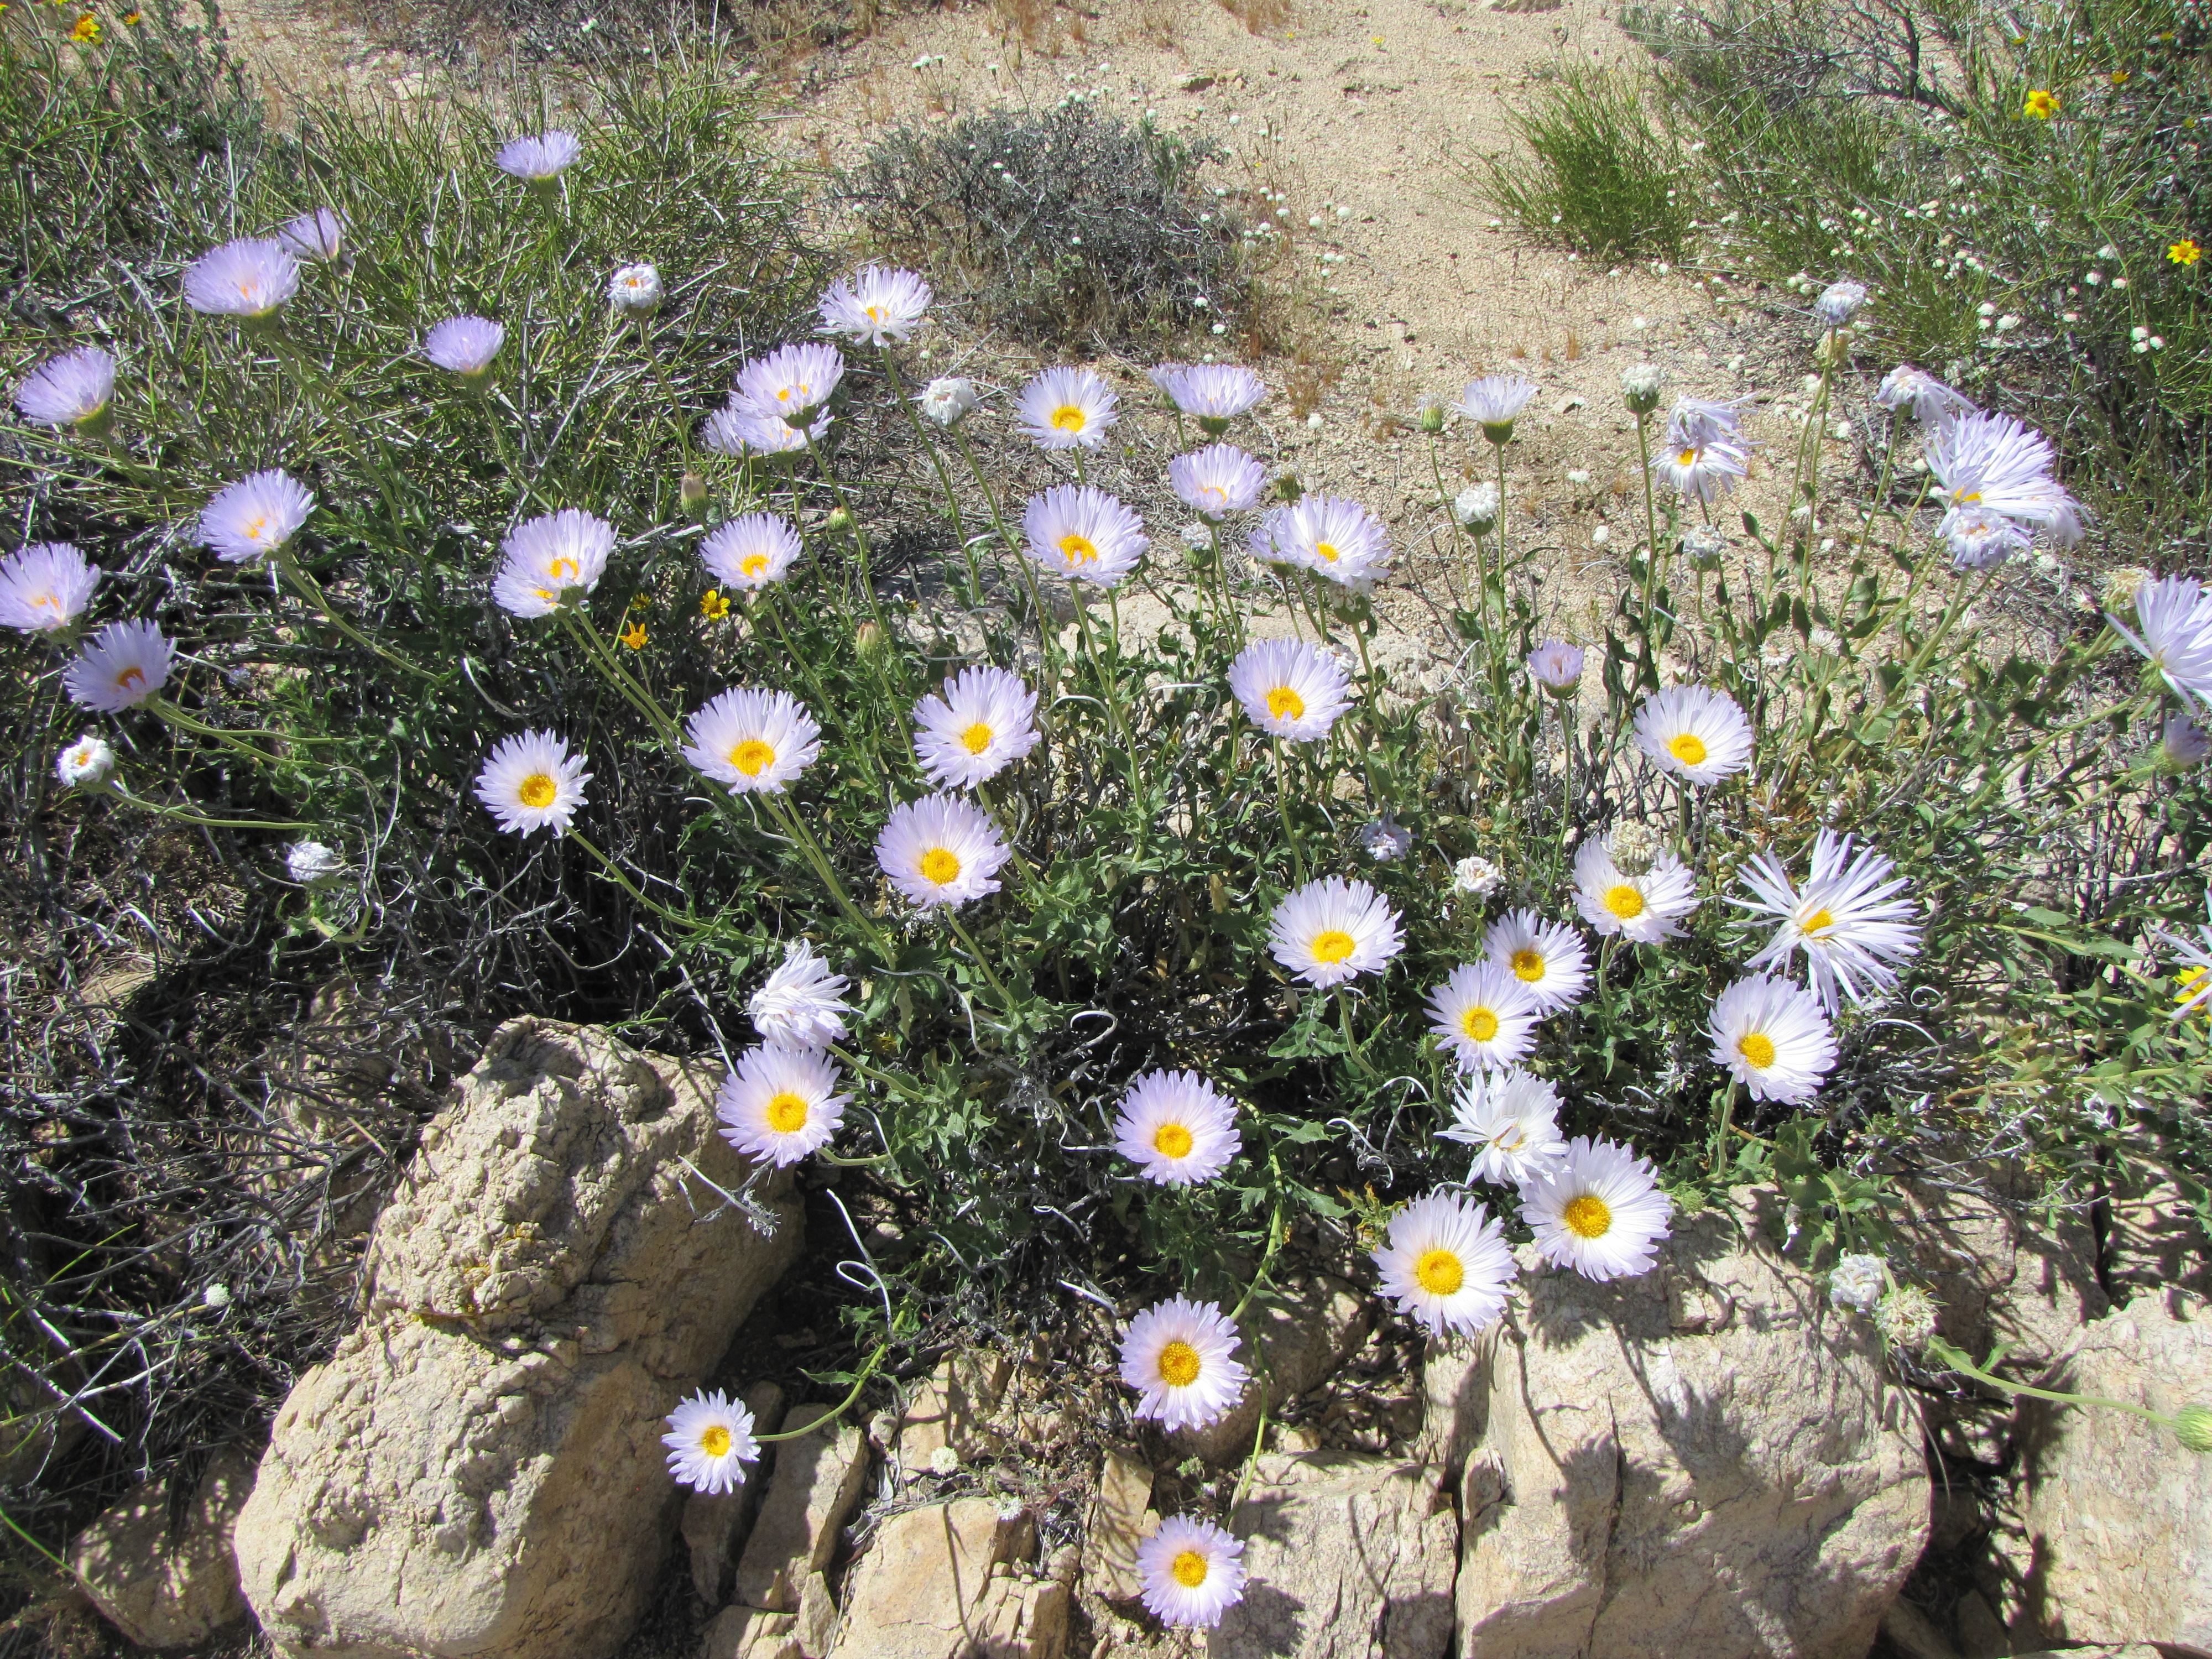 Color photo of purple asters in a bunch in desert landscape.